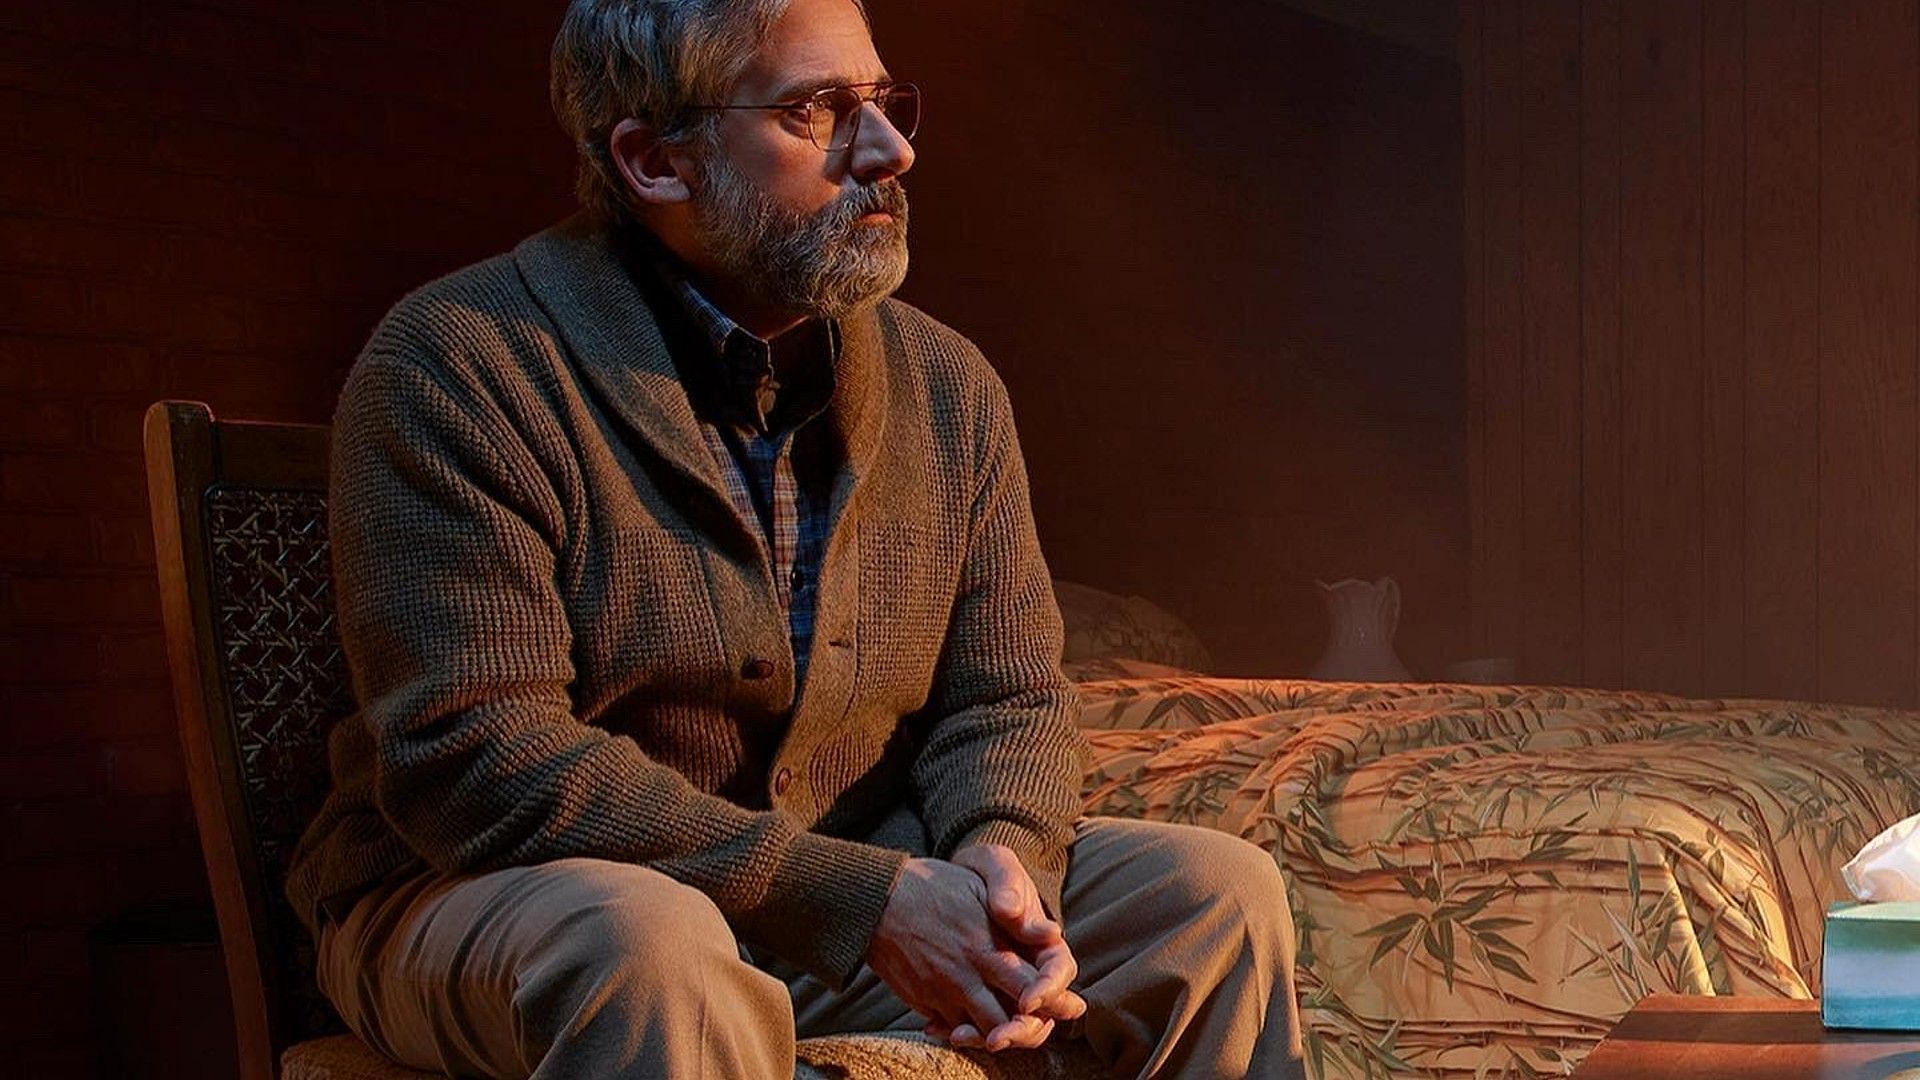 Steve Carell in the show (Image via Twitter/@FXNetworks)